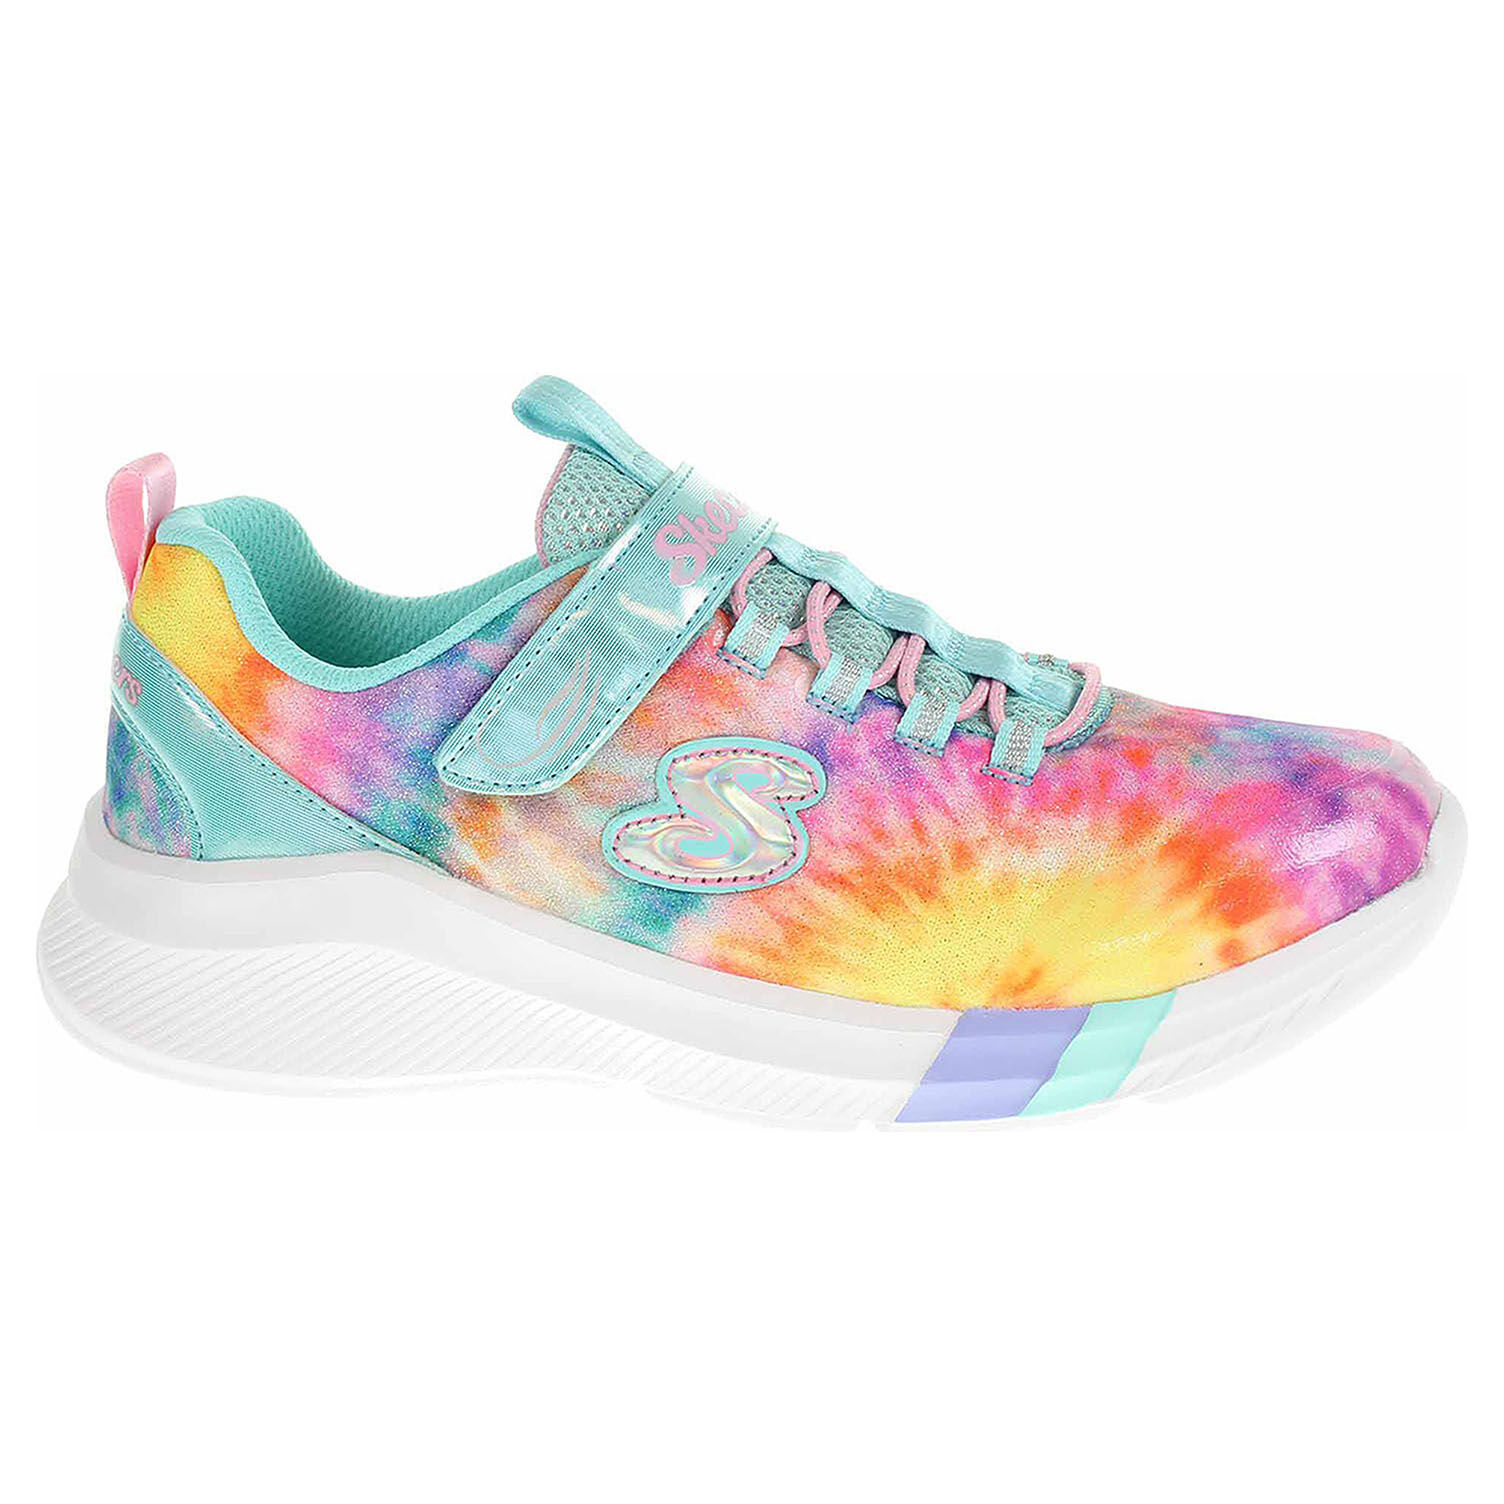 Skechers Dreamy Lites - Sunny Groove turquoise-multi 28